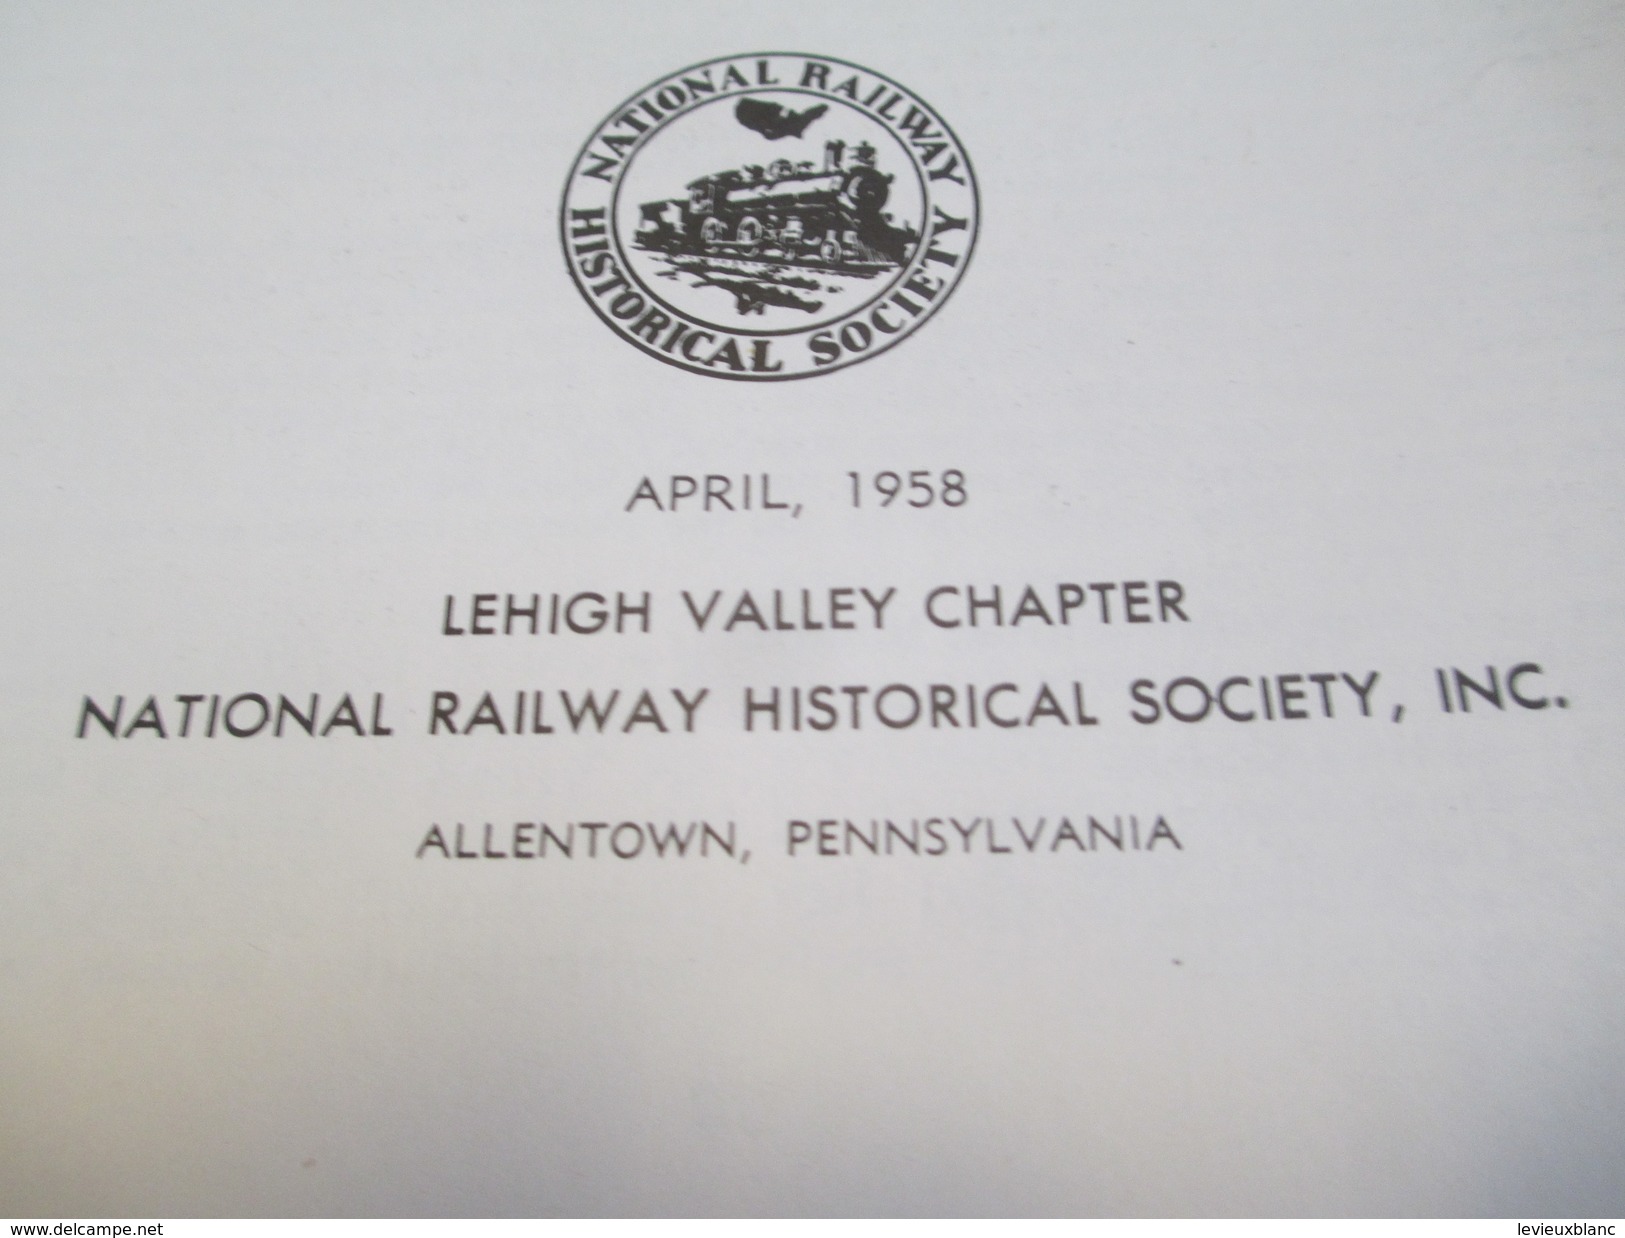 Fascicule/The Liberty Bell Route's/History &Roster/National Railway Historical Society Inc/USA/Pennsylvania/1958   TRA24 - War 1939-45